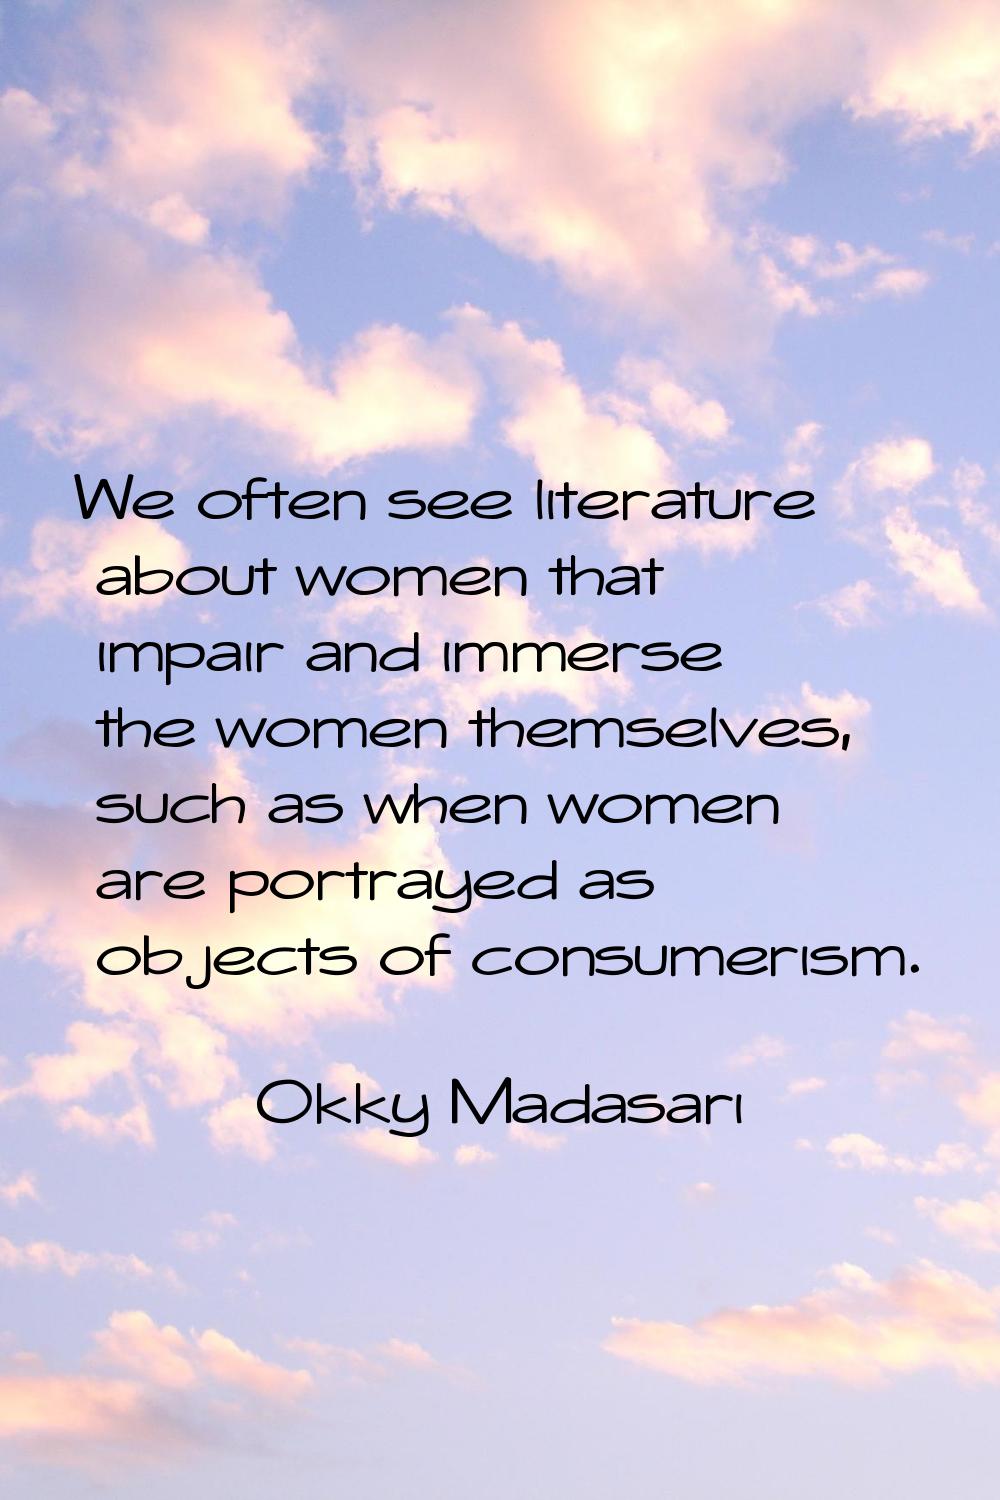 We often see literature about women that impair and immerse the women themselves, such as when wome